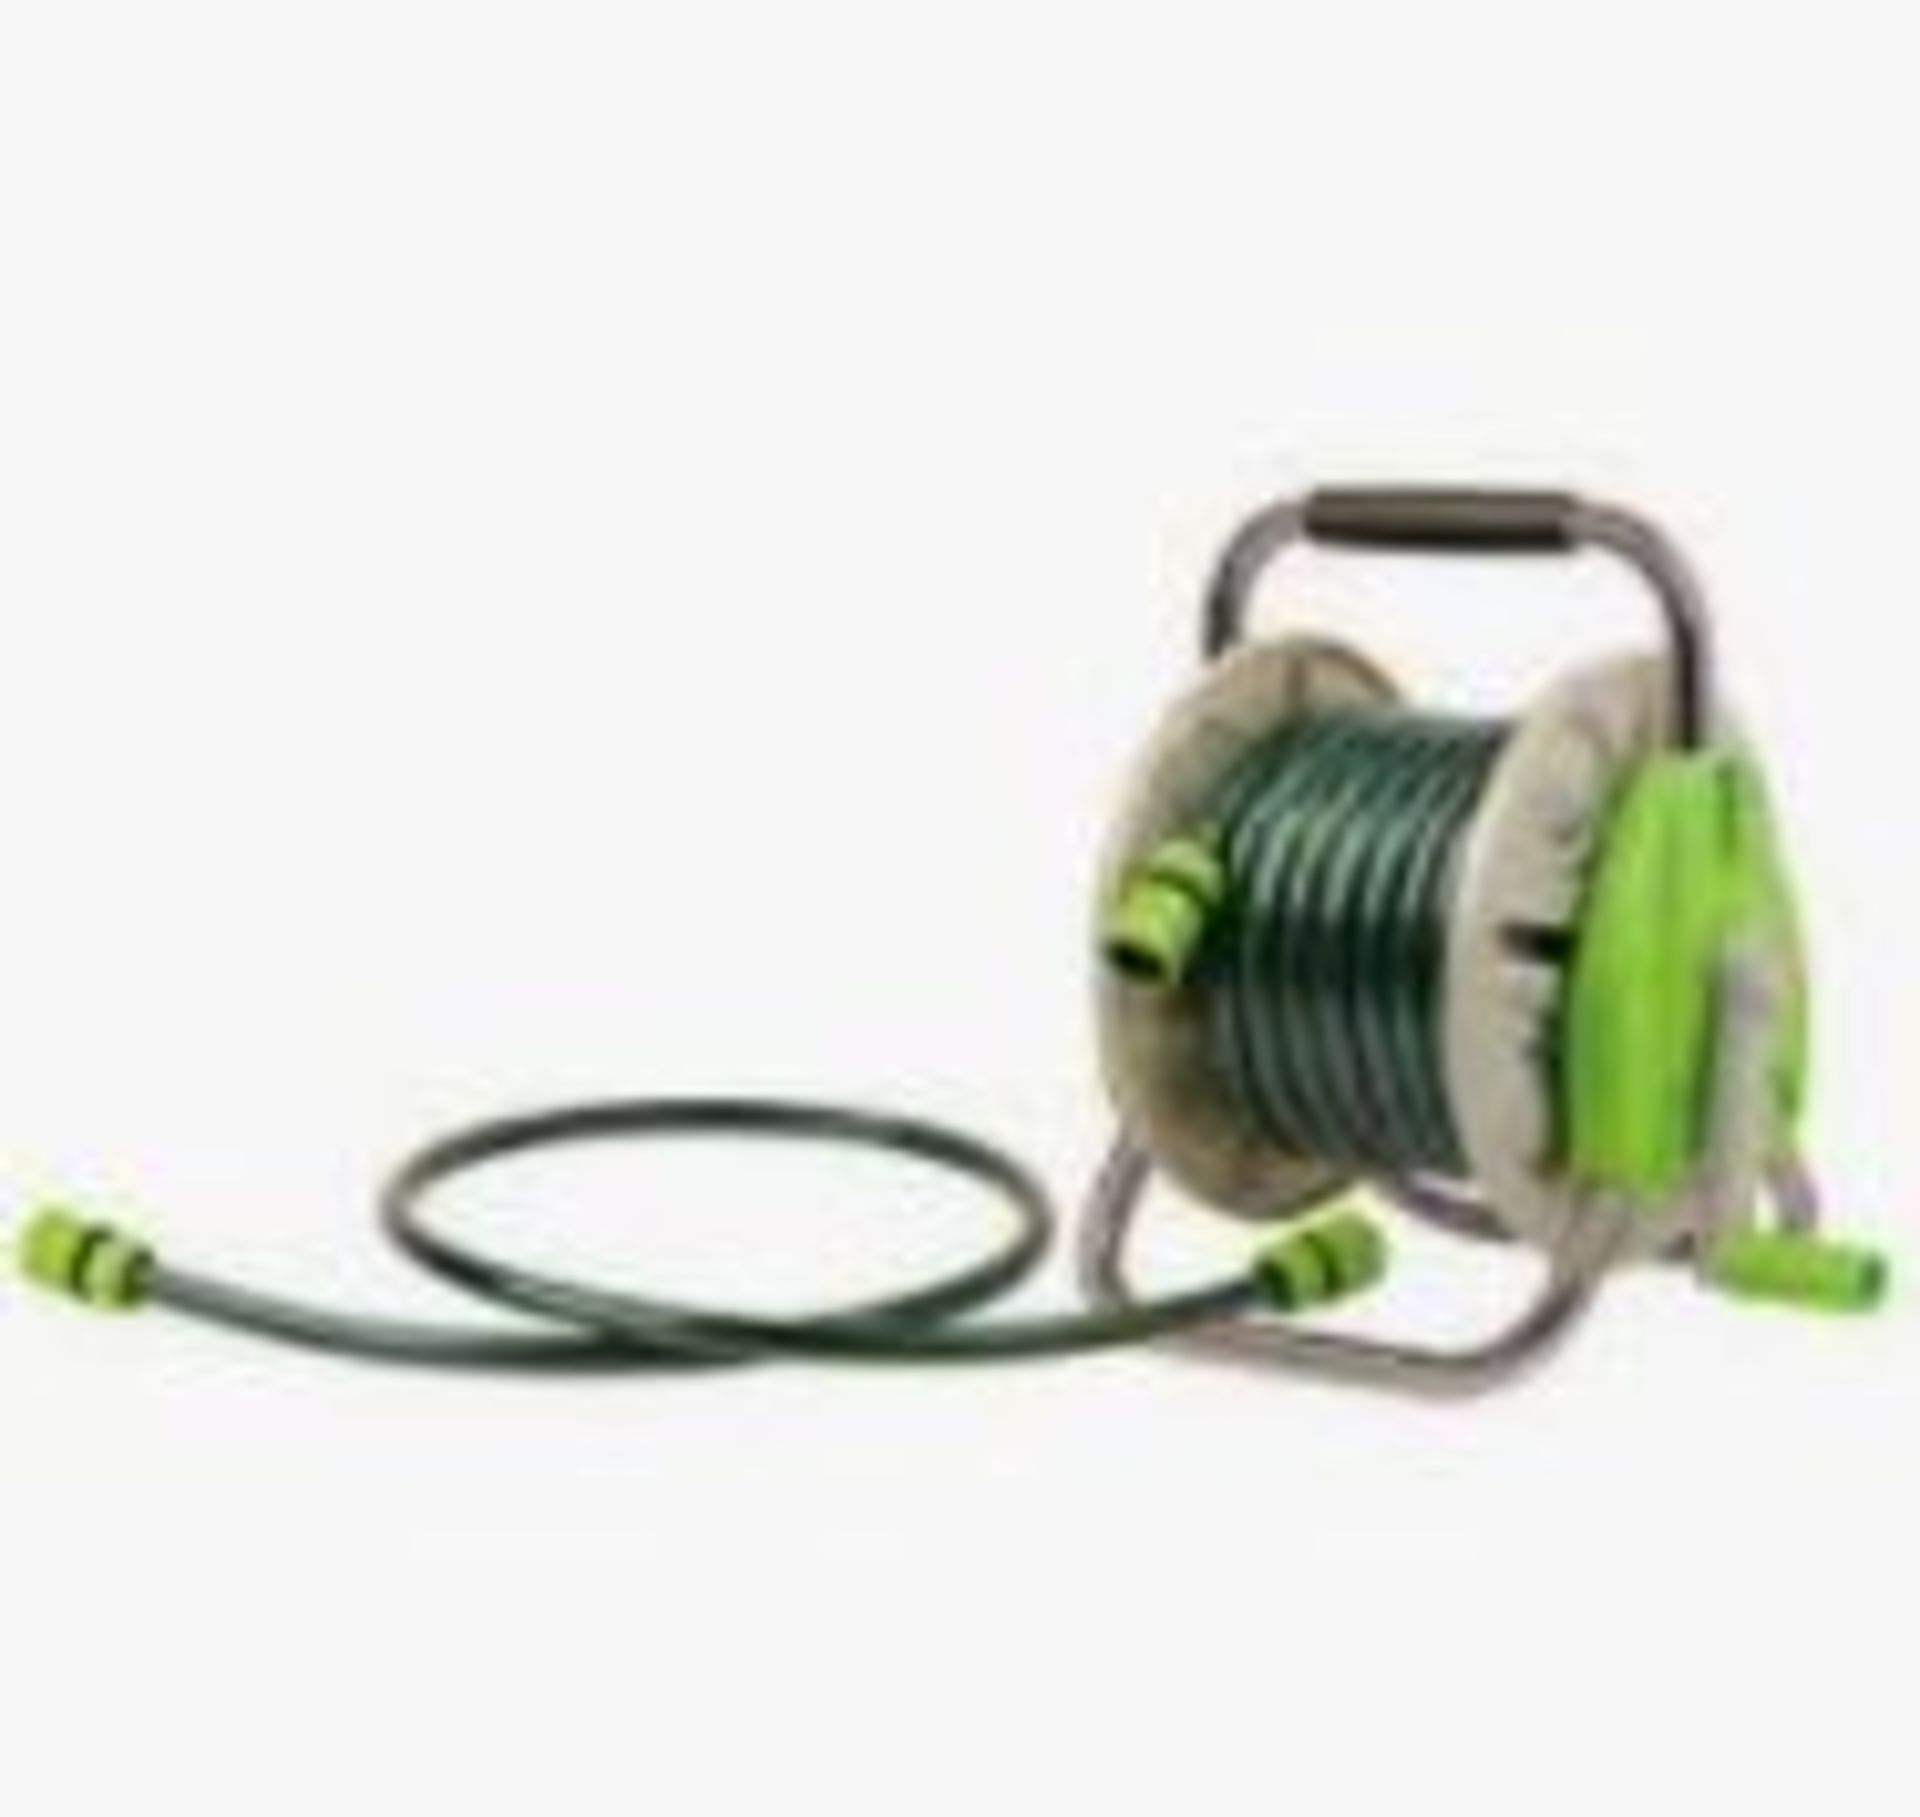 (R5C) 4x Expandable 15M Garden Hose And Connectors. 2x 15M Garden Hose And Reel Set. 1x Lawn Rake. - Image 2 of 4